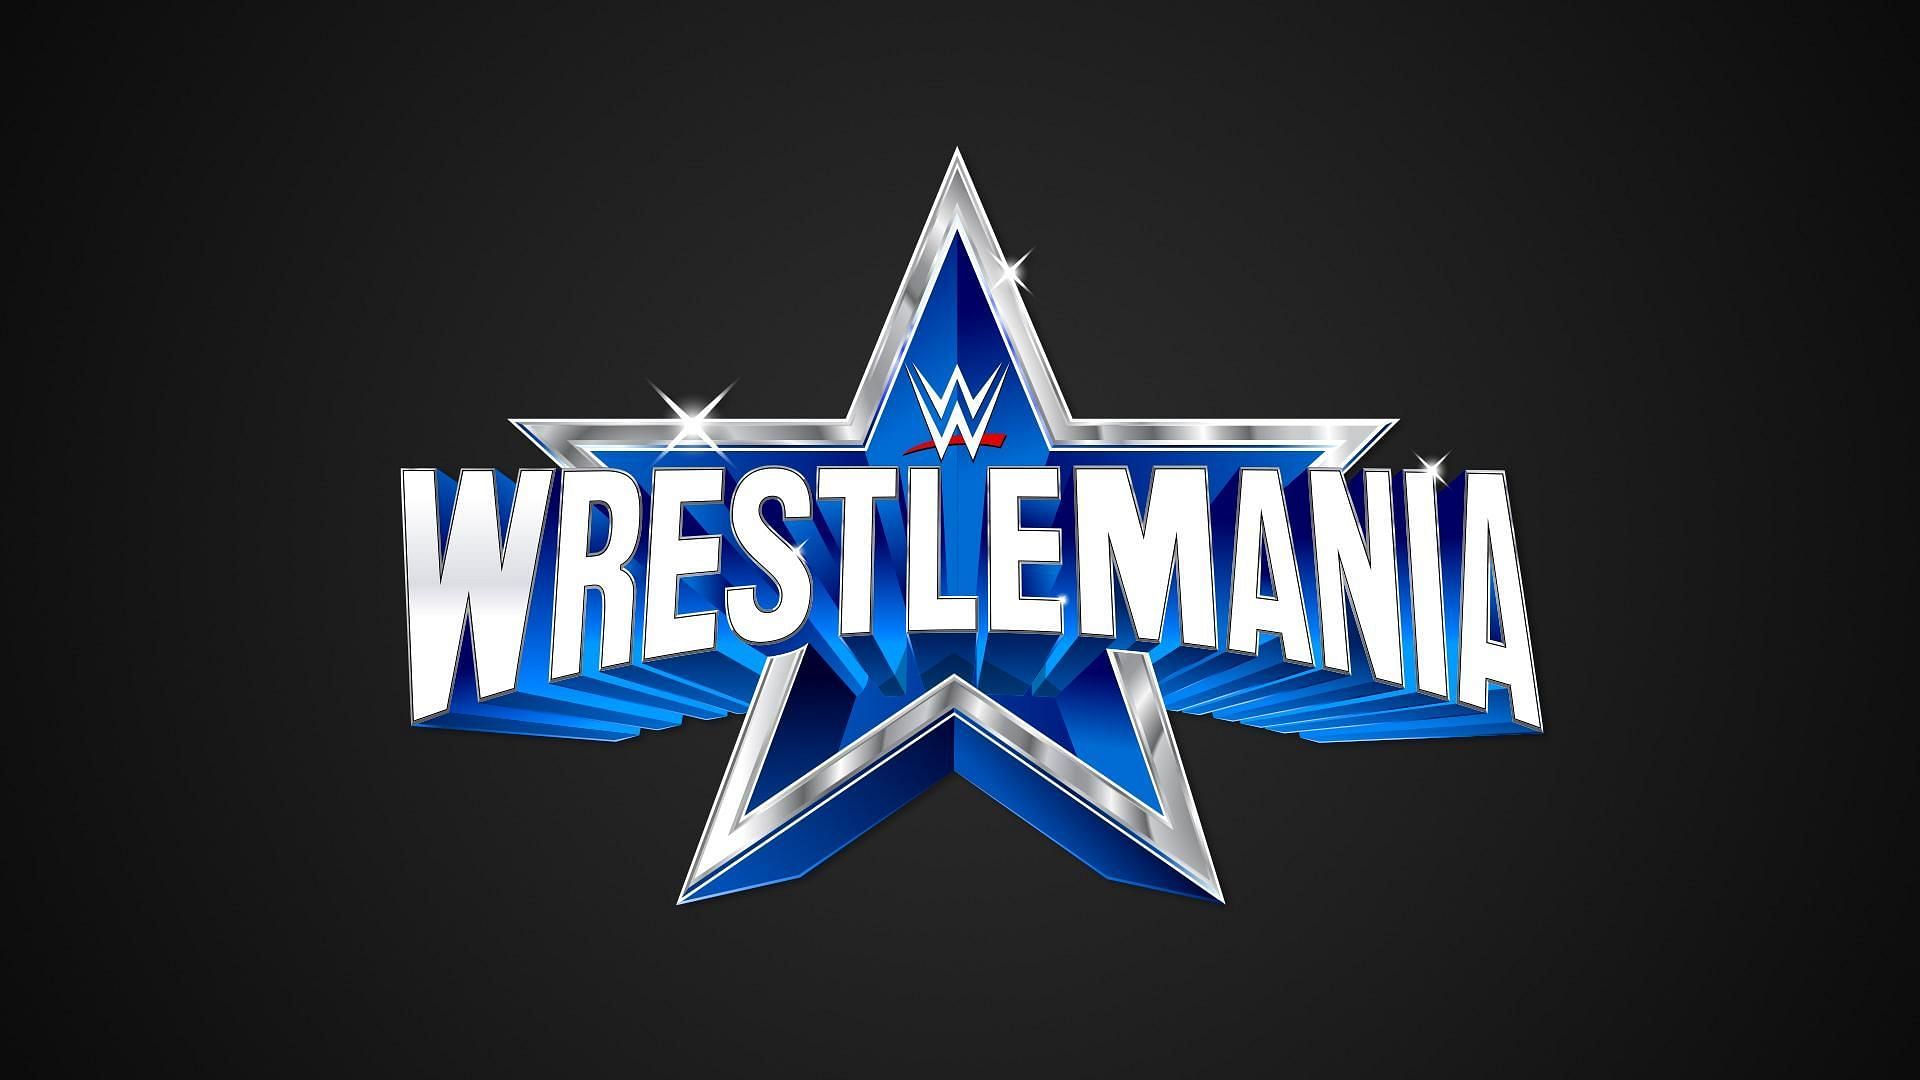 The upcoming WrestleMania 38 is the latest in the series, taking place on April 2 and 3